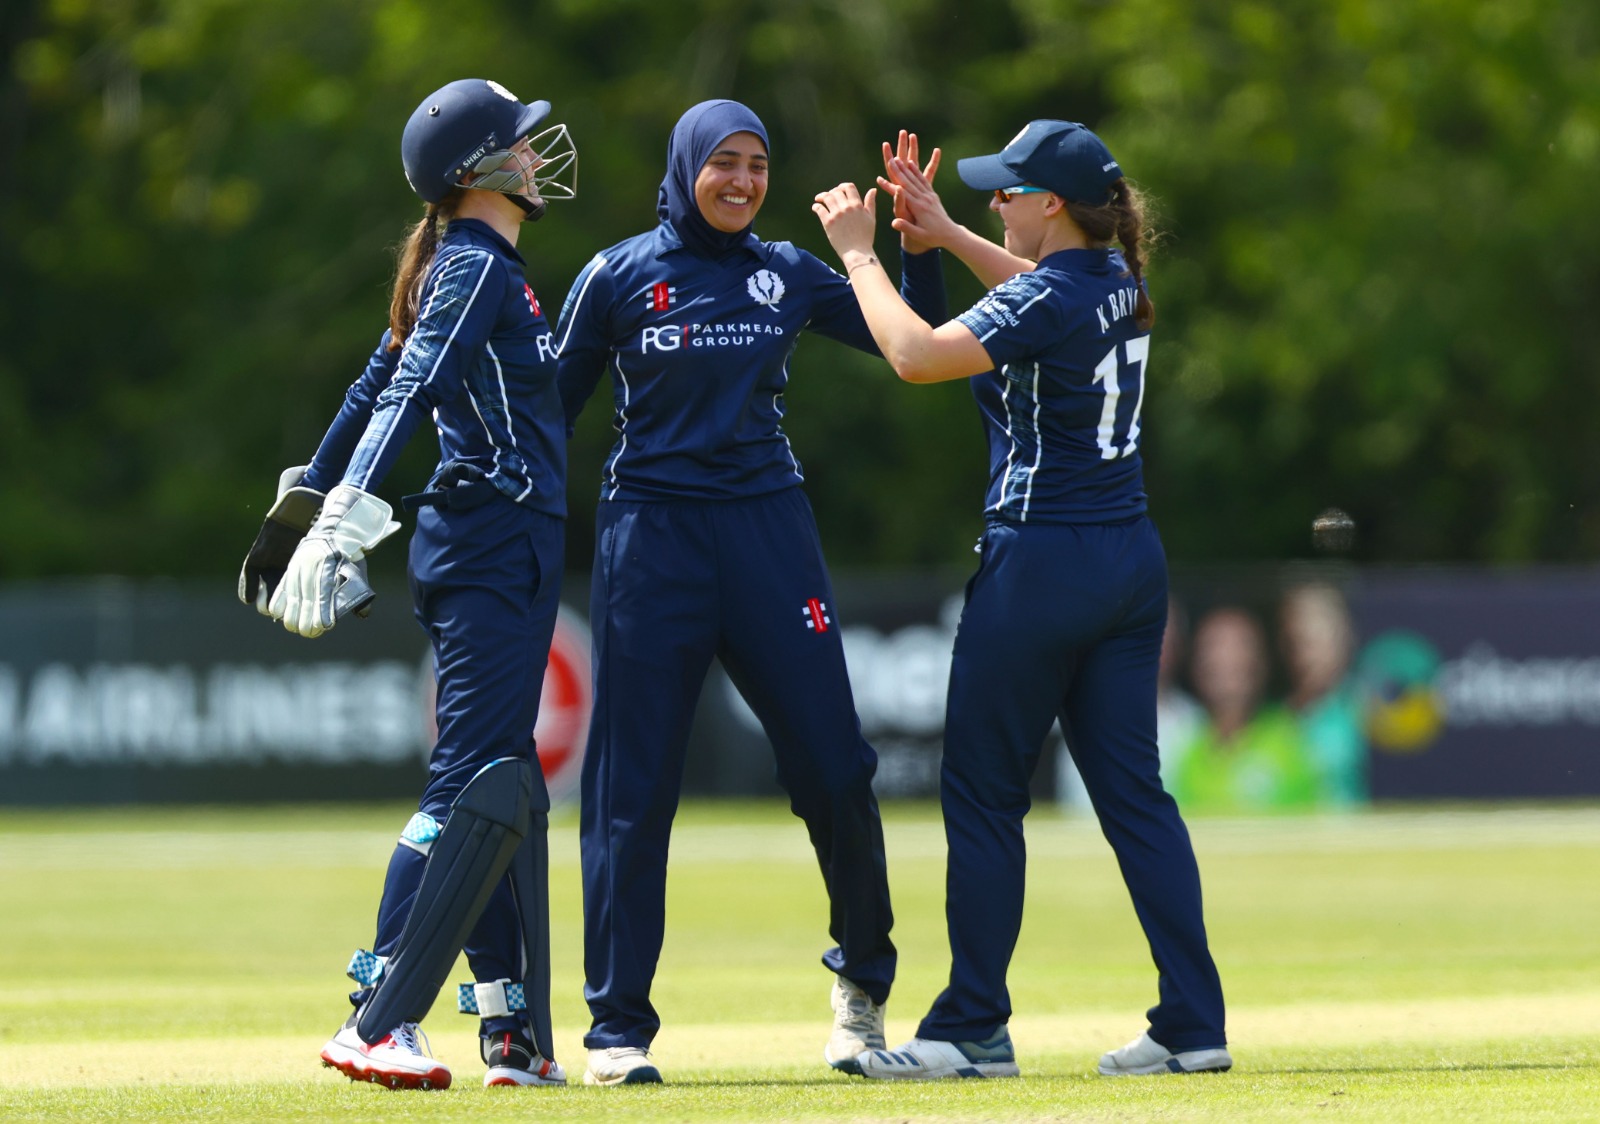 Scotland’s women aim to start 2022 on a high at Commonwealth Games qualifier